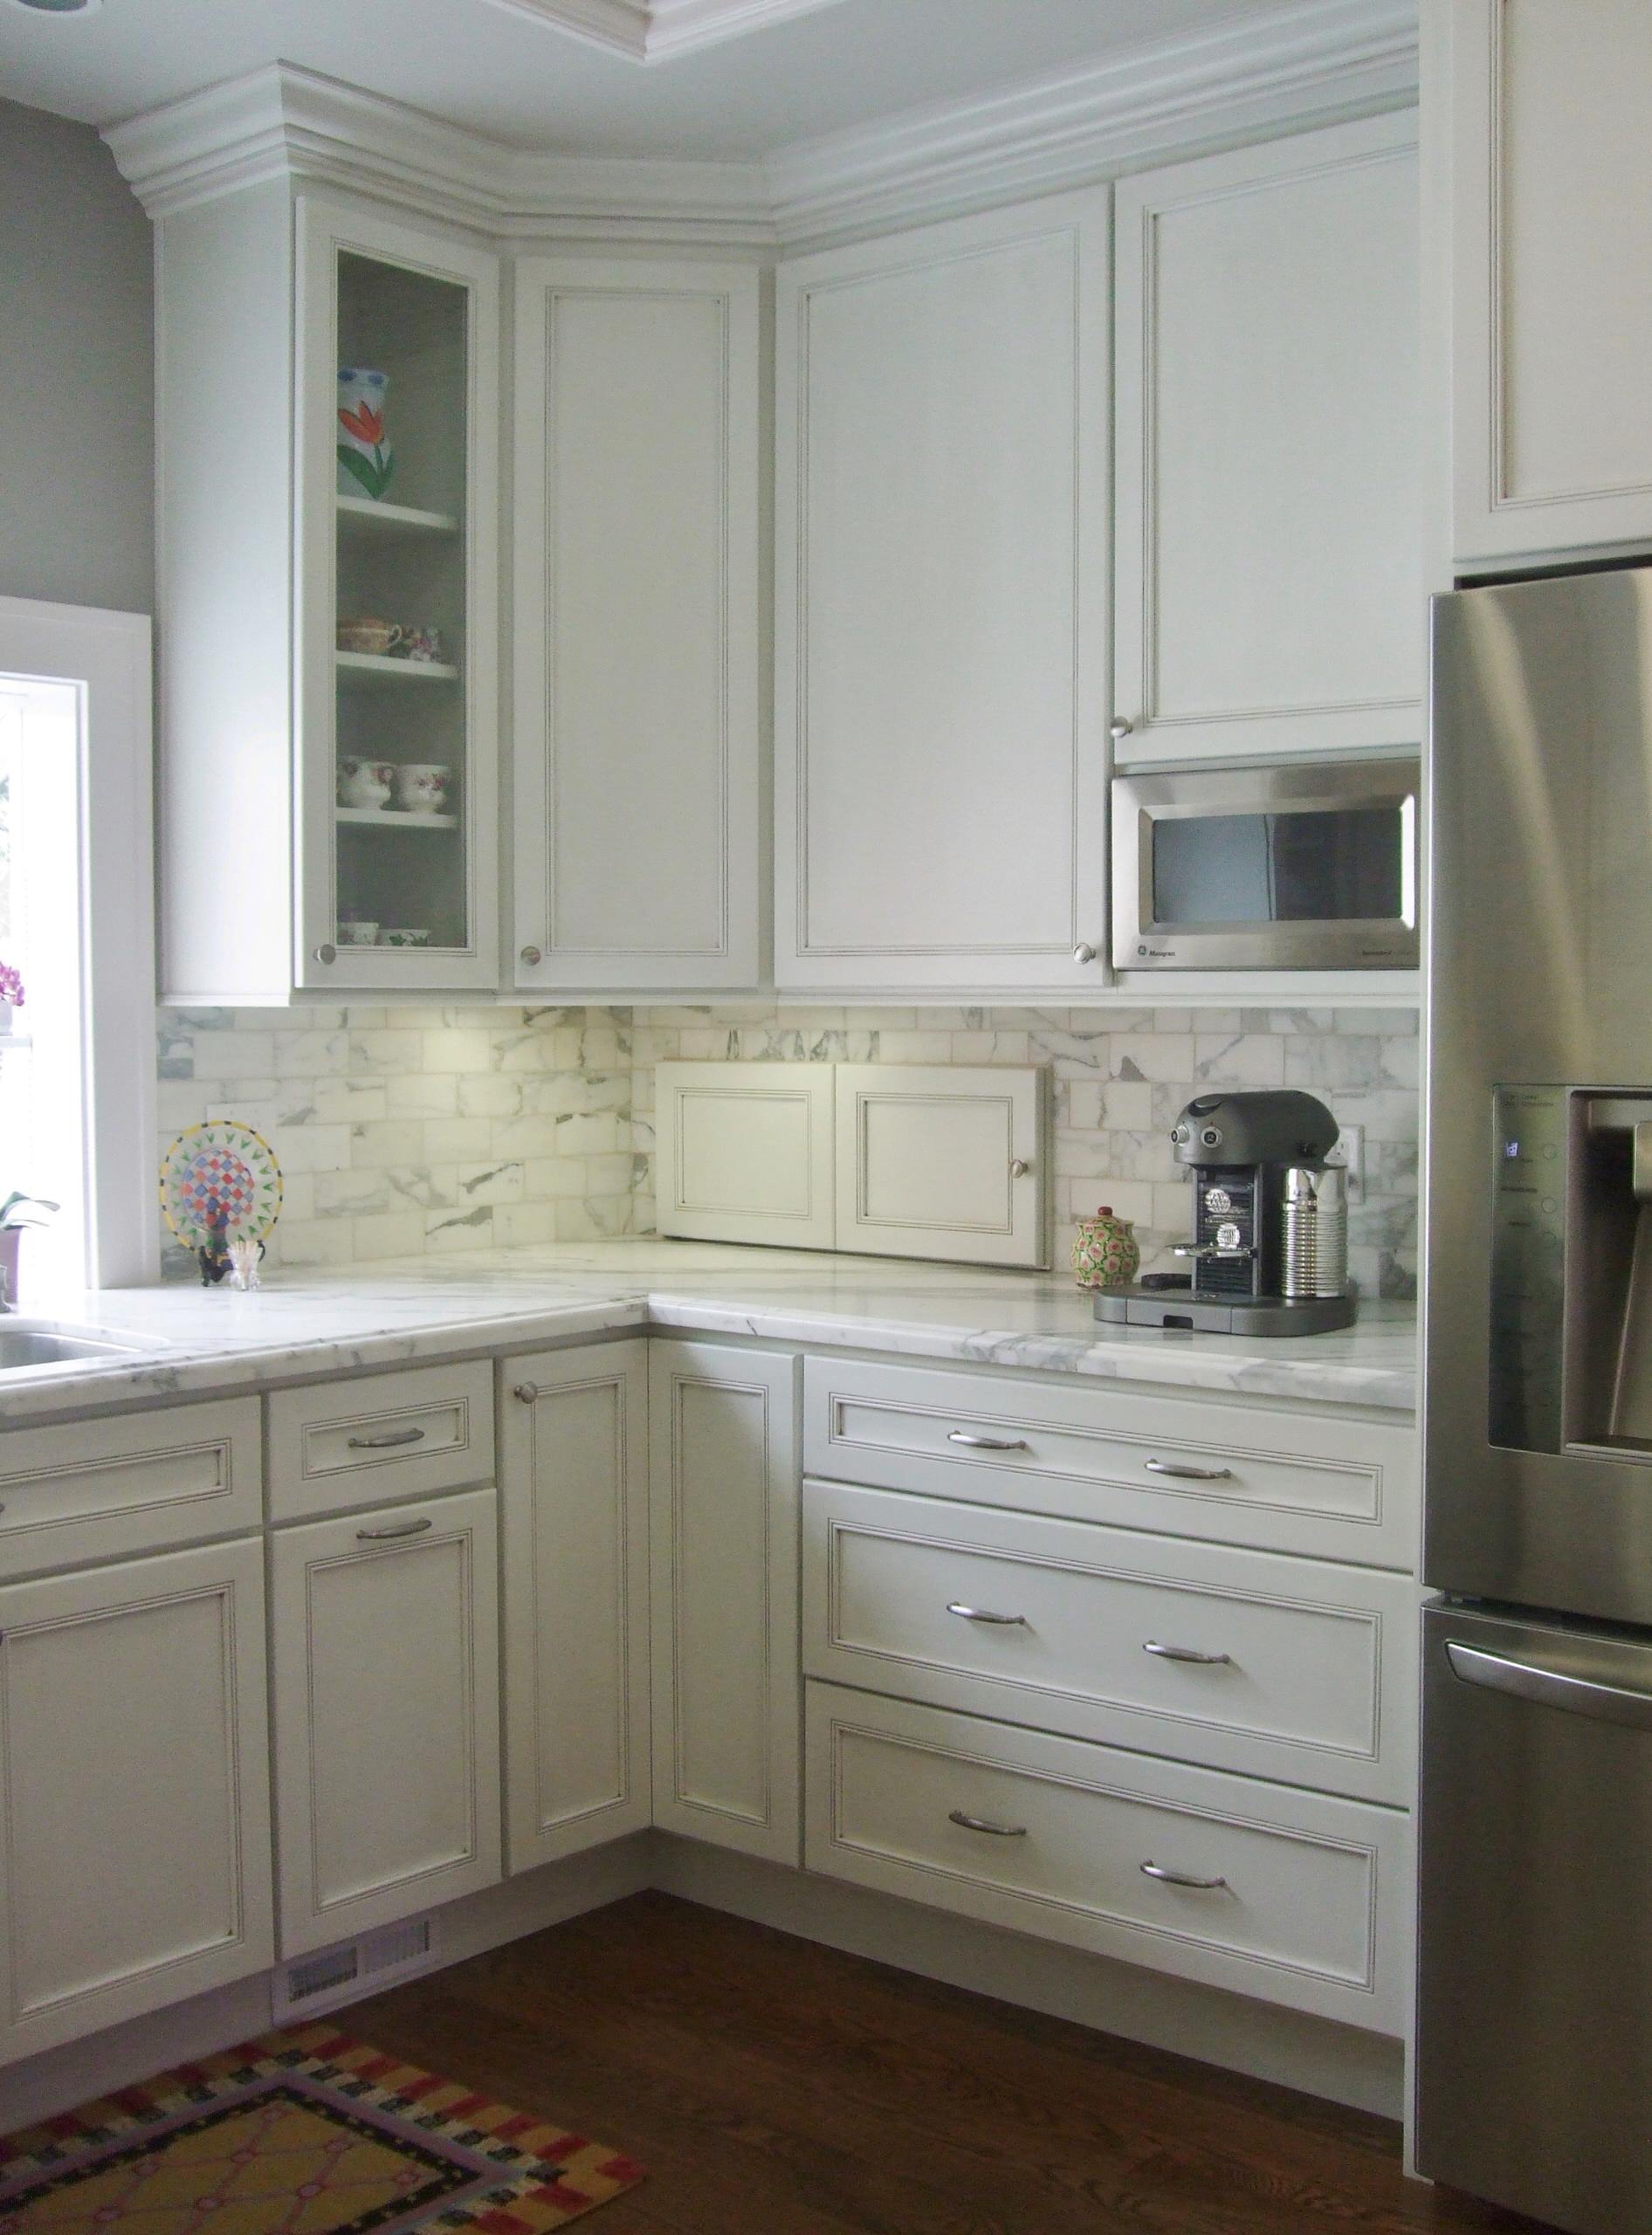 Excelent white kitchen cabinets with gray glaze White Cabinets Gray Glaze Houzz